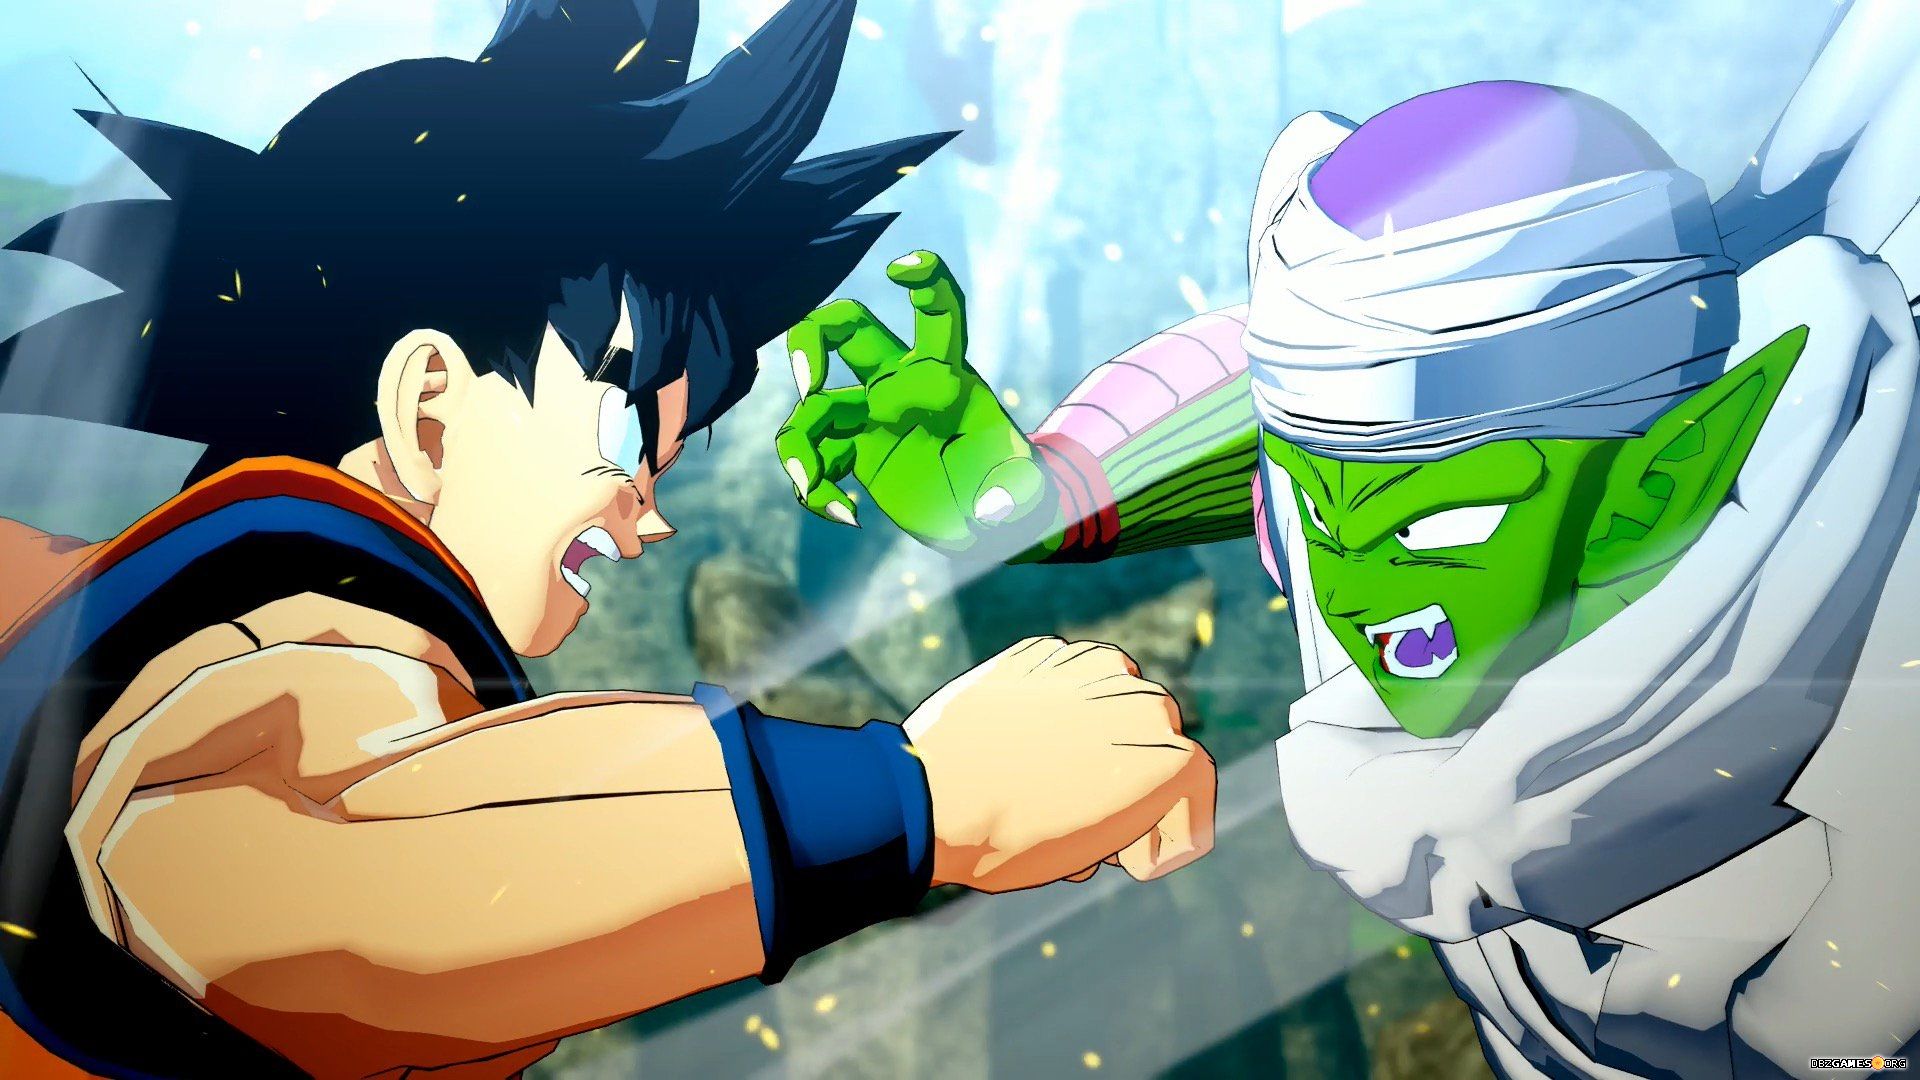 Dragon Ball Game - Project Z coming to PS4, Xone, and PC in 2019, first trailer - DBZGames.org